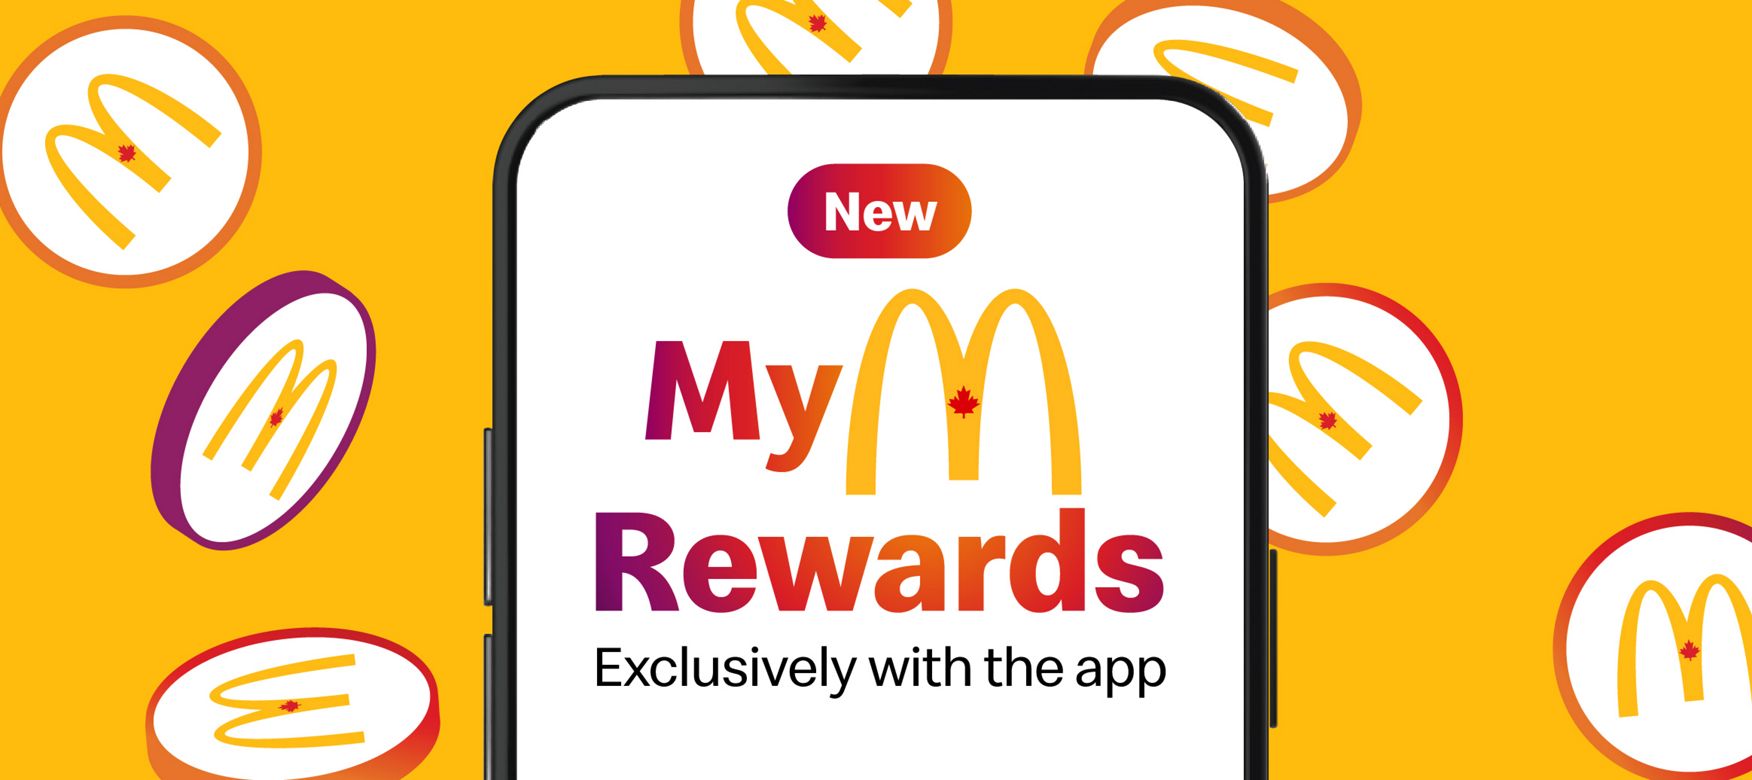 MyMcDonald's Rewards. Exclusively with the app